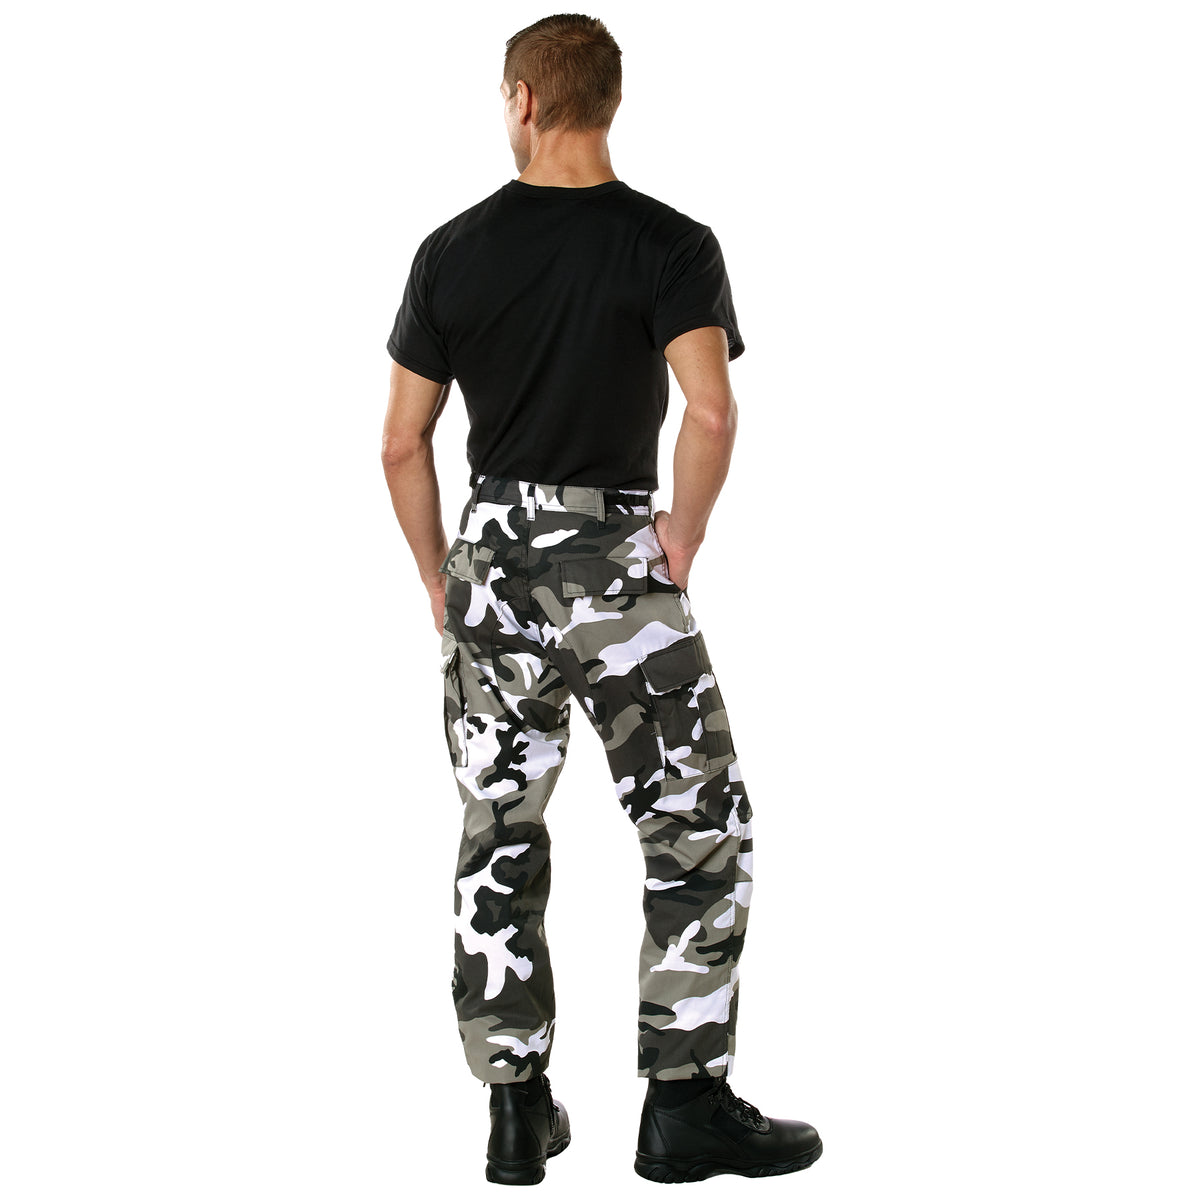 Rothco Color Camo Tactical BDU Pants – industryblanks